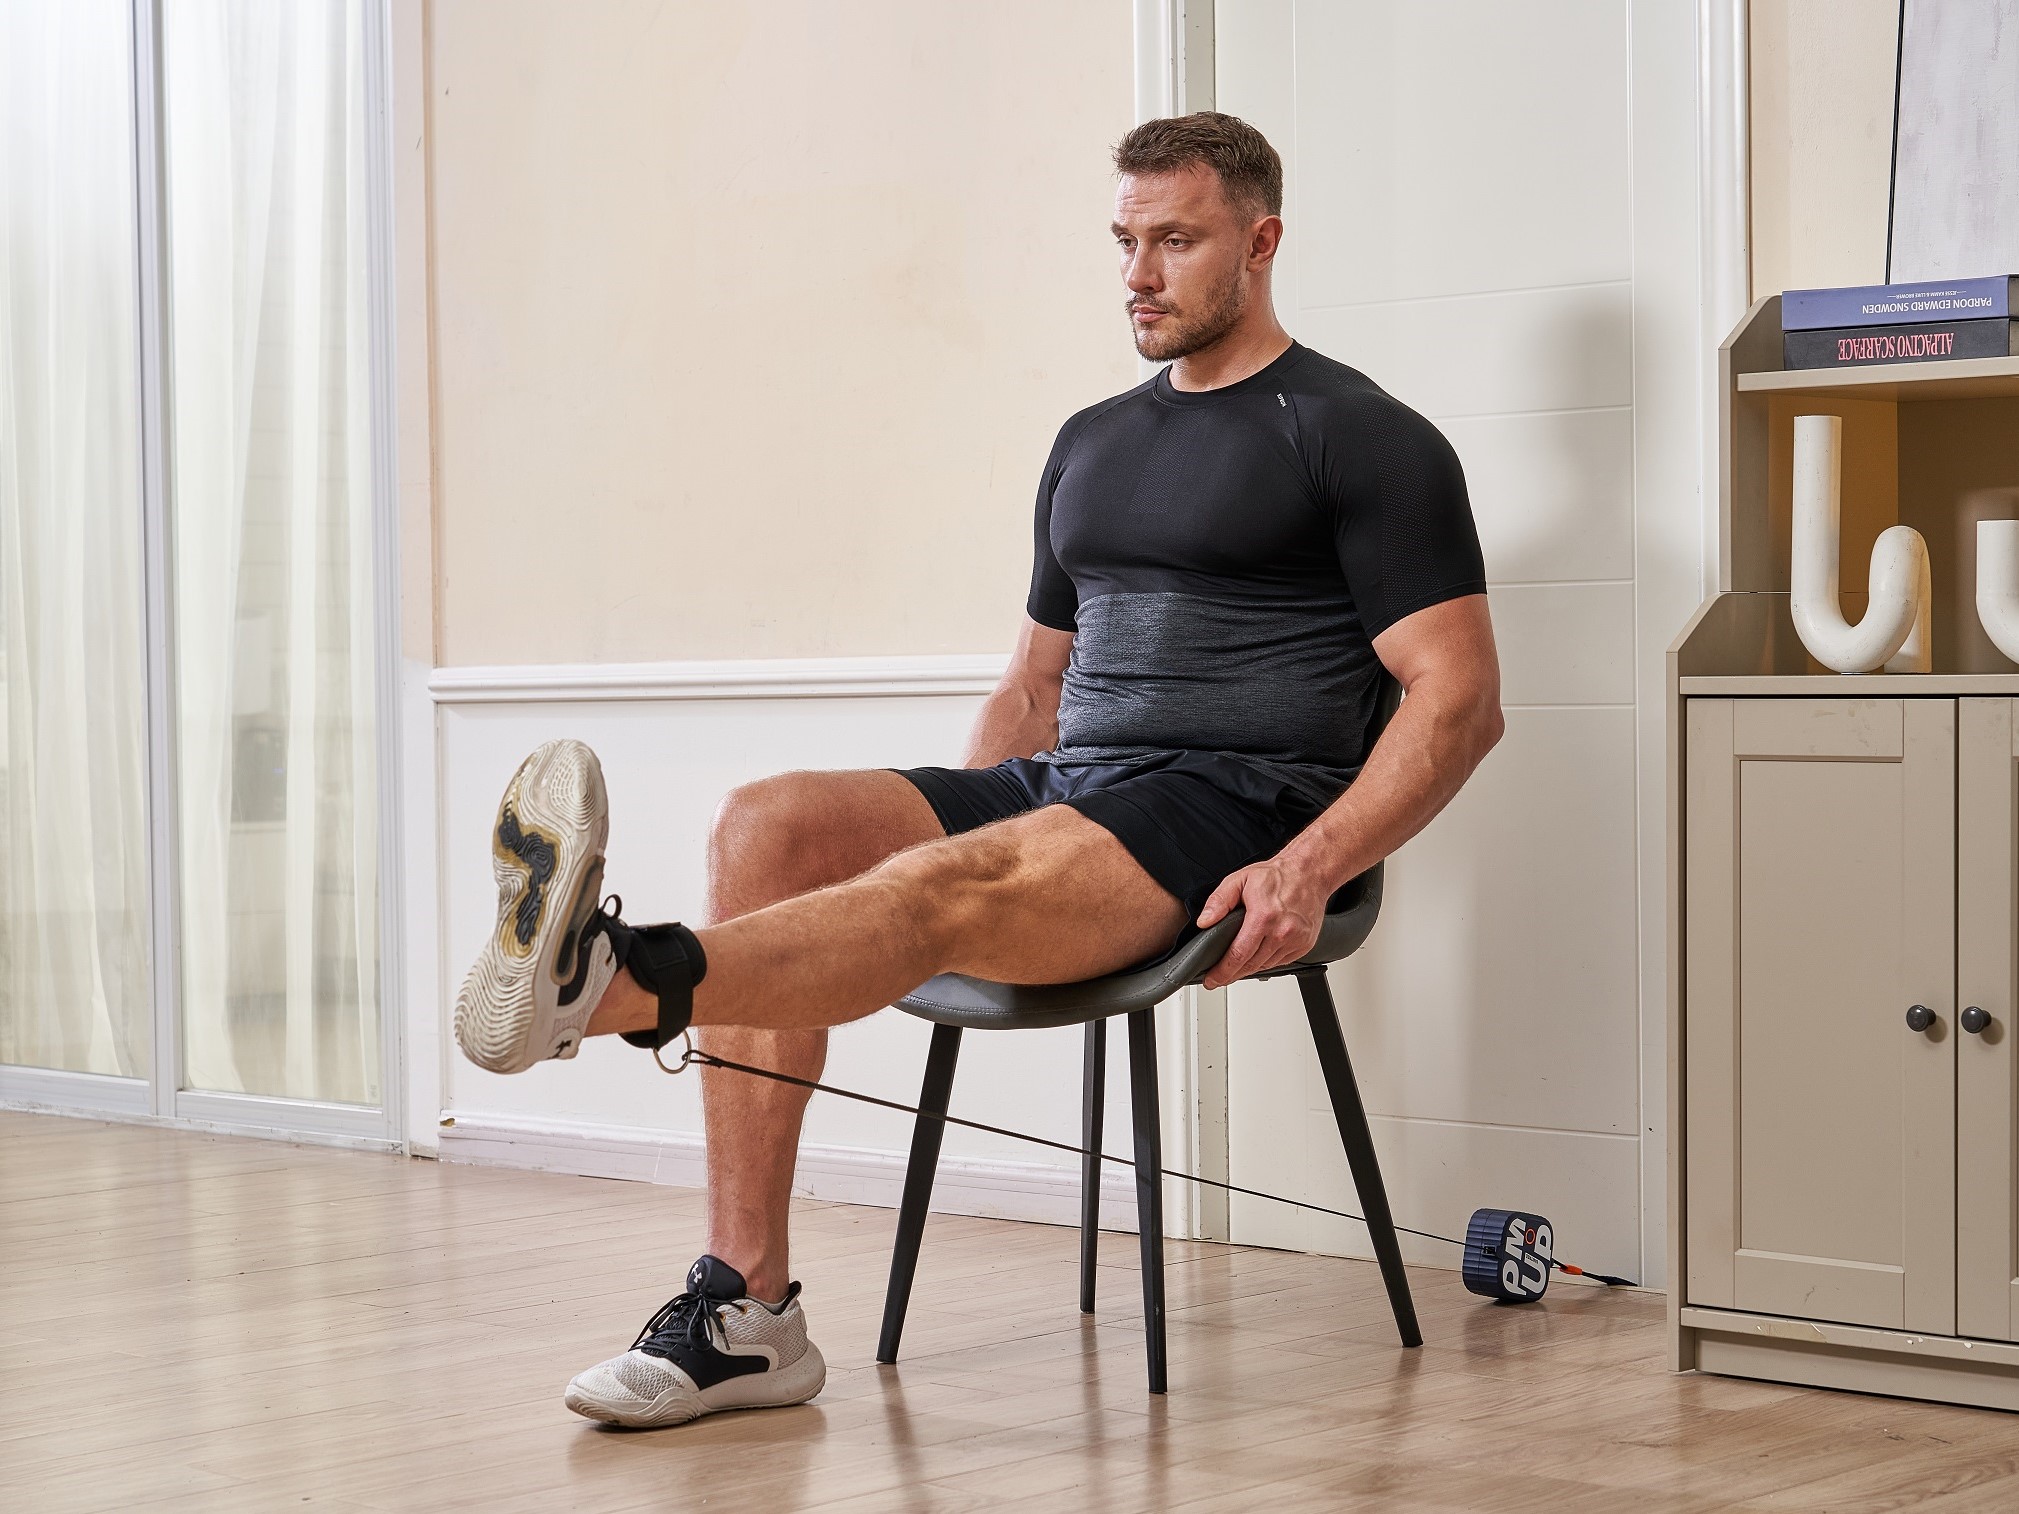 These incredible leg workouts don't include any squats or lunges